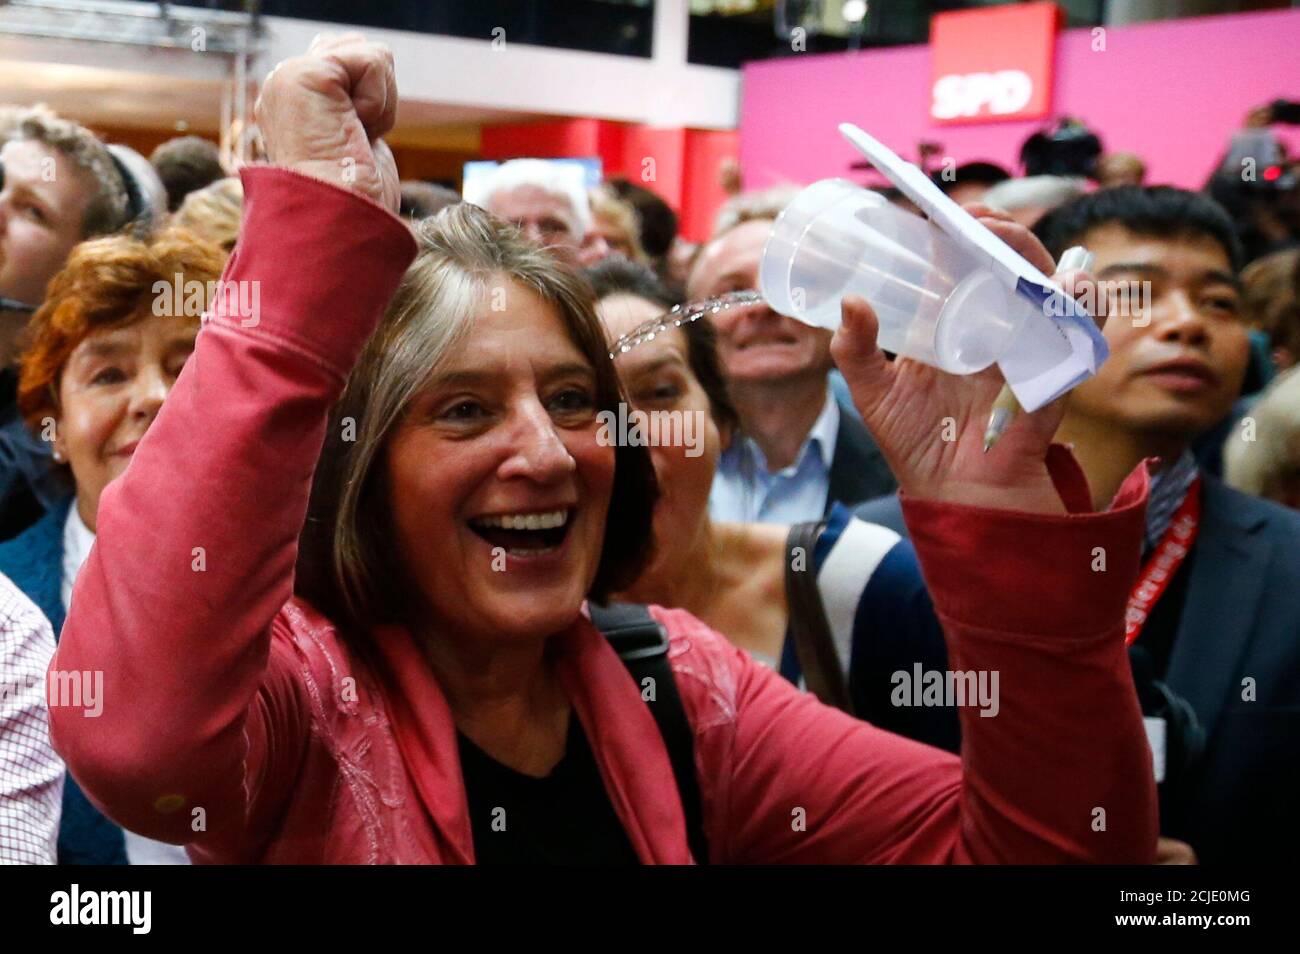 Social Democratic Party (SPD) supporters react to first exit polls in the German general election (Bundestagswahl) at the party headquarters in Berlin, September 22, 2013.  REUTERS/Thomas Peter (GERMANY  - Tags: POLITICS ELECTIONS TPX IMAGES OF THE DAY) Stock Photo